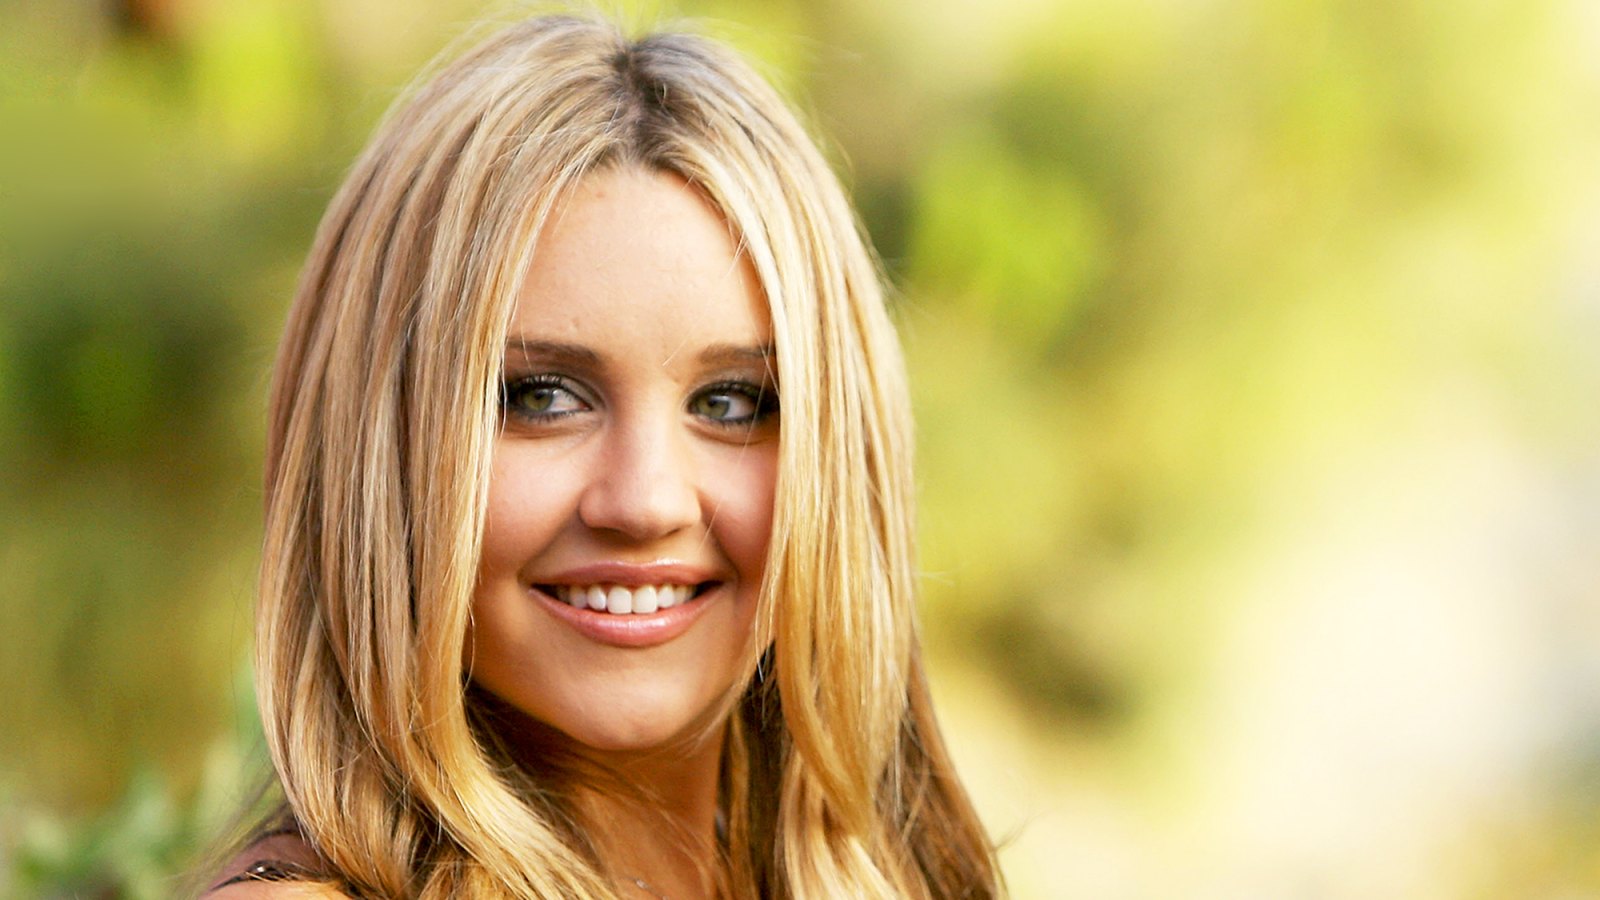 Amanda Bynes attends the 8th Annual Chrysalis Butterfly Ball in Brentwood, California.